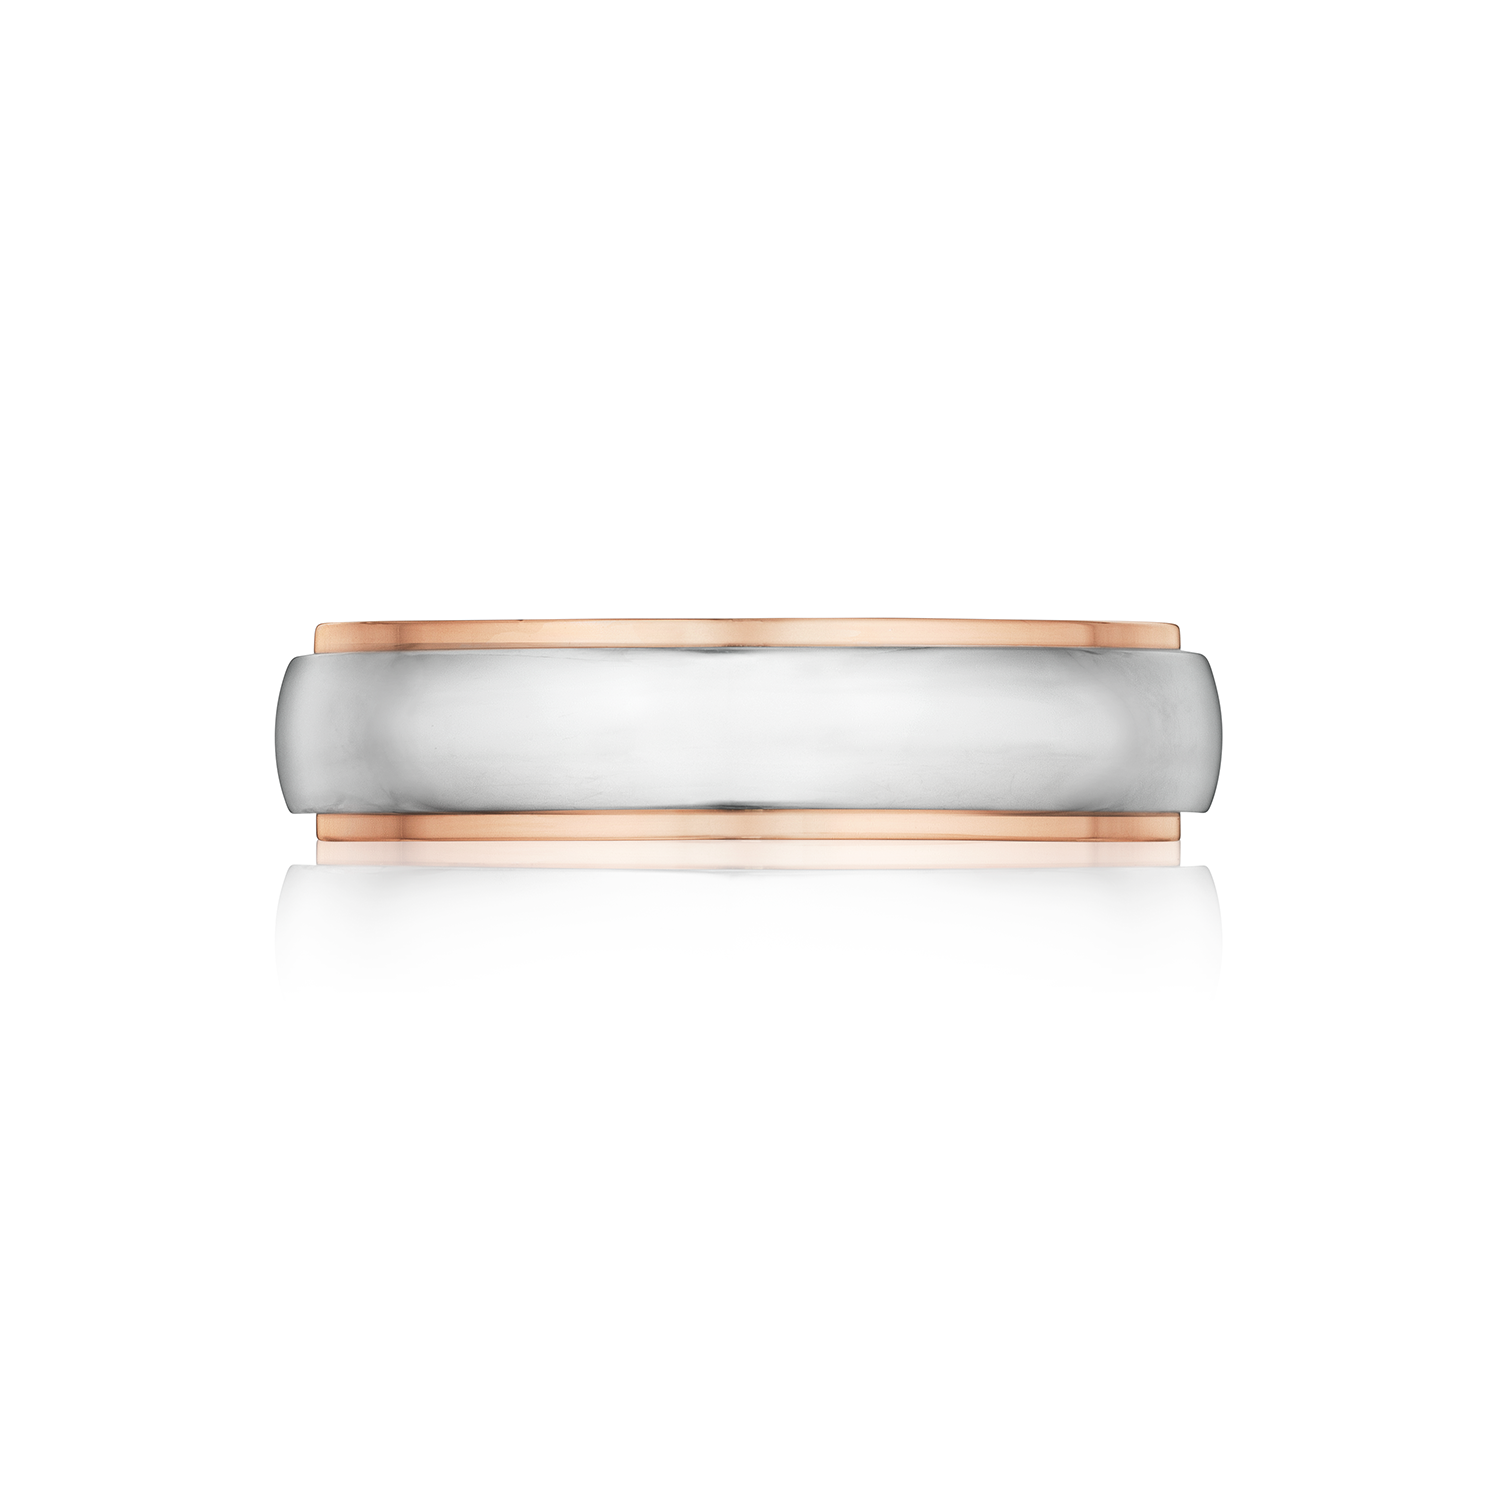 Step Edge Gold Wedding Band in Platinum and Rose Gold